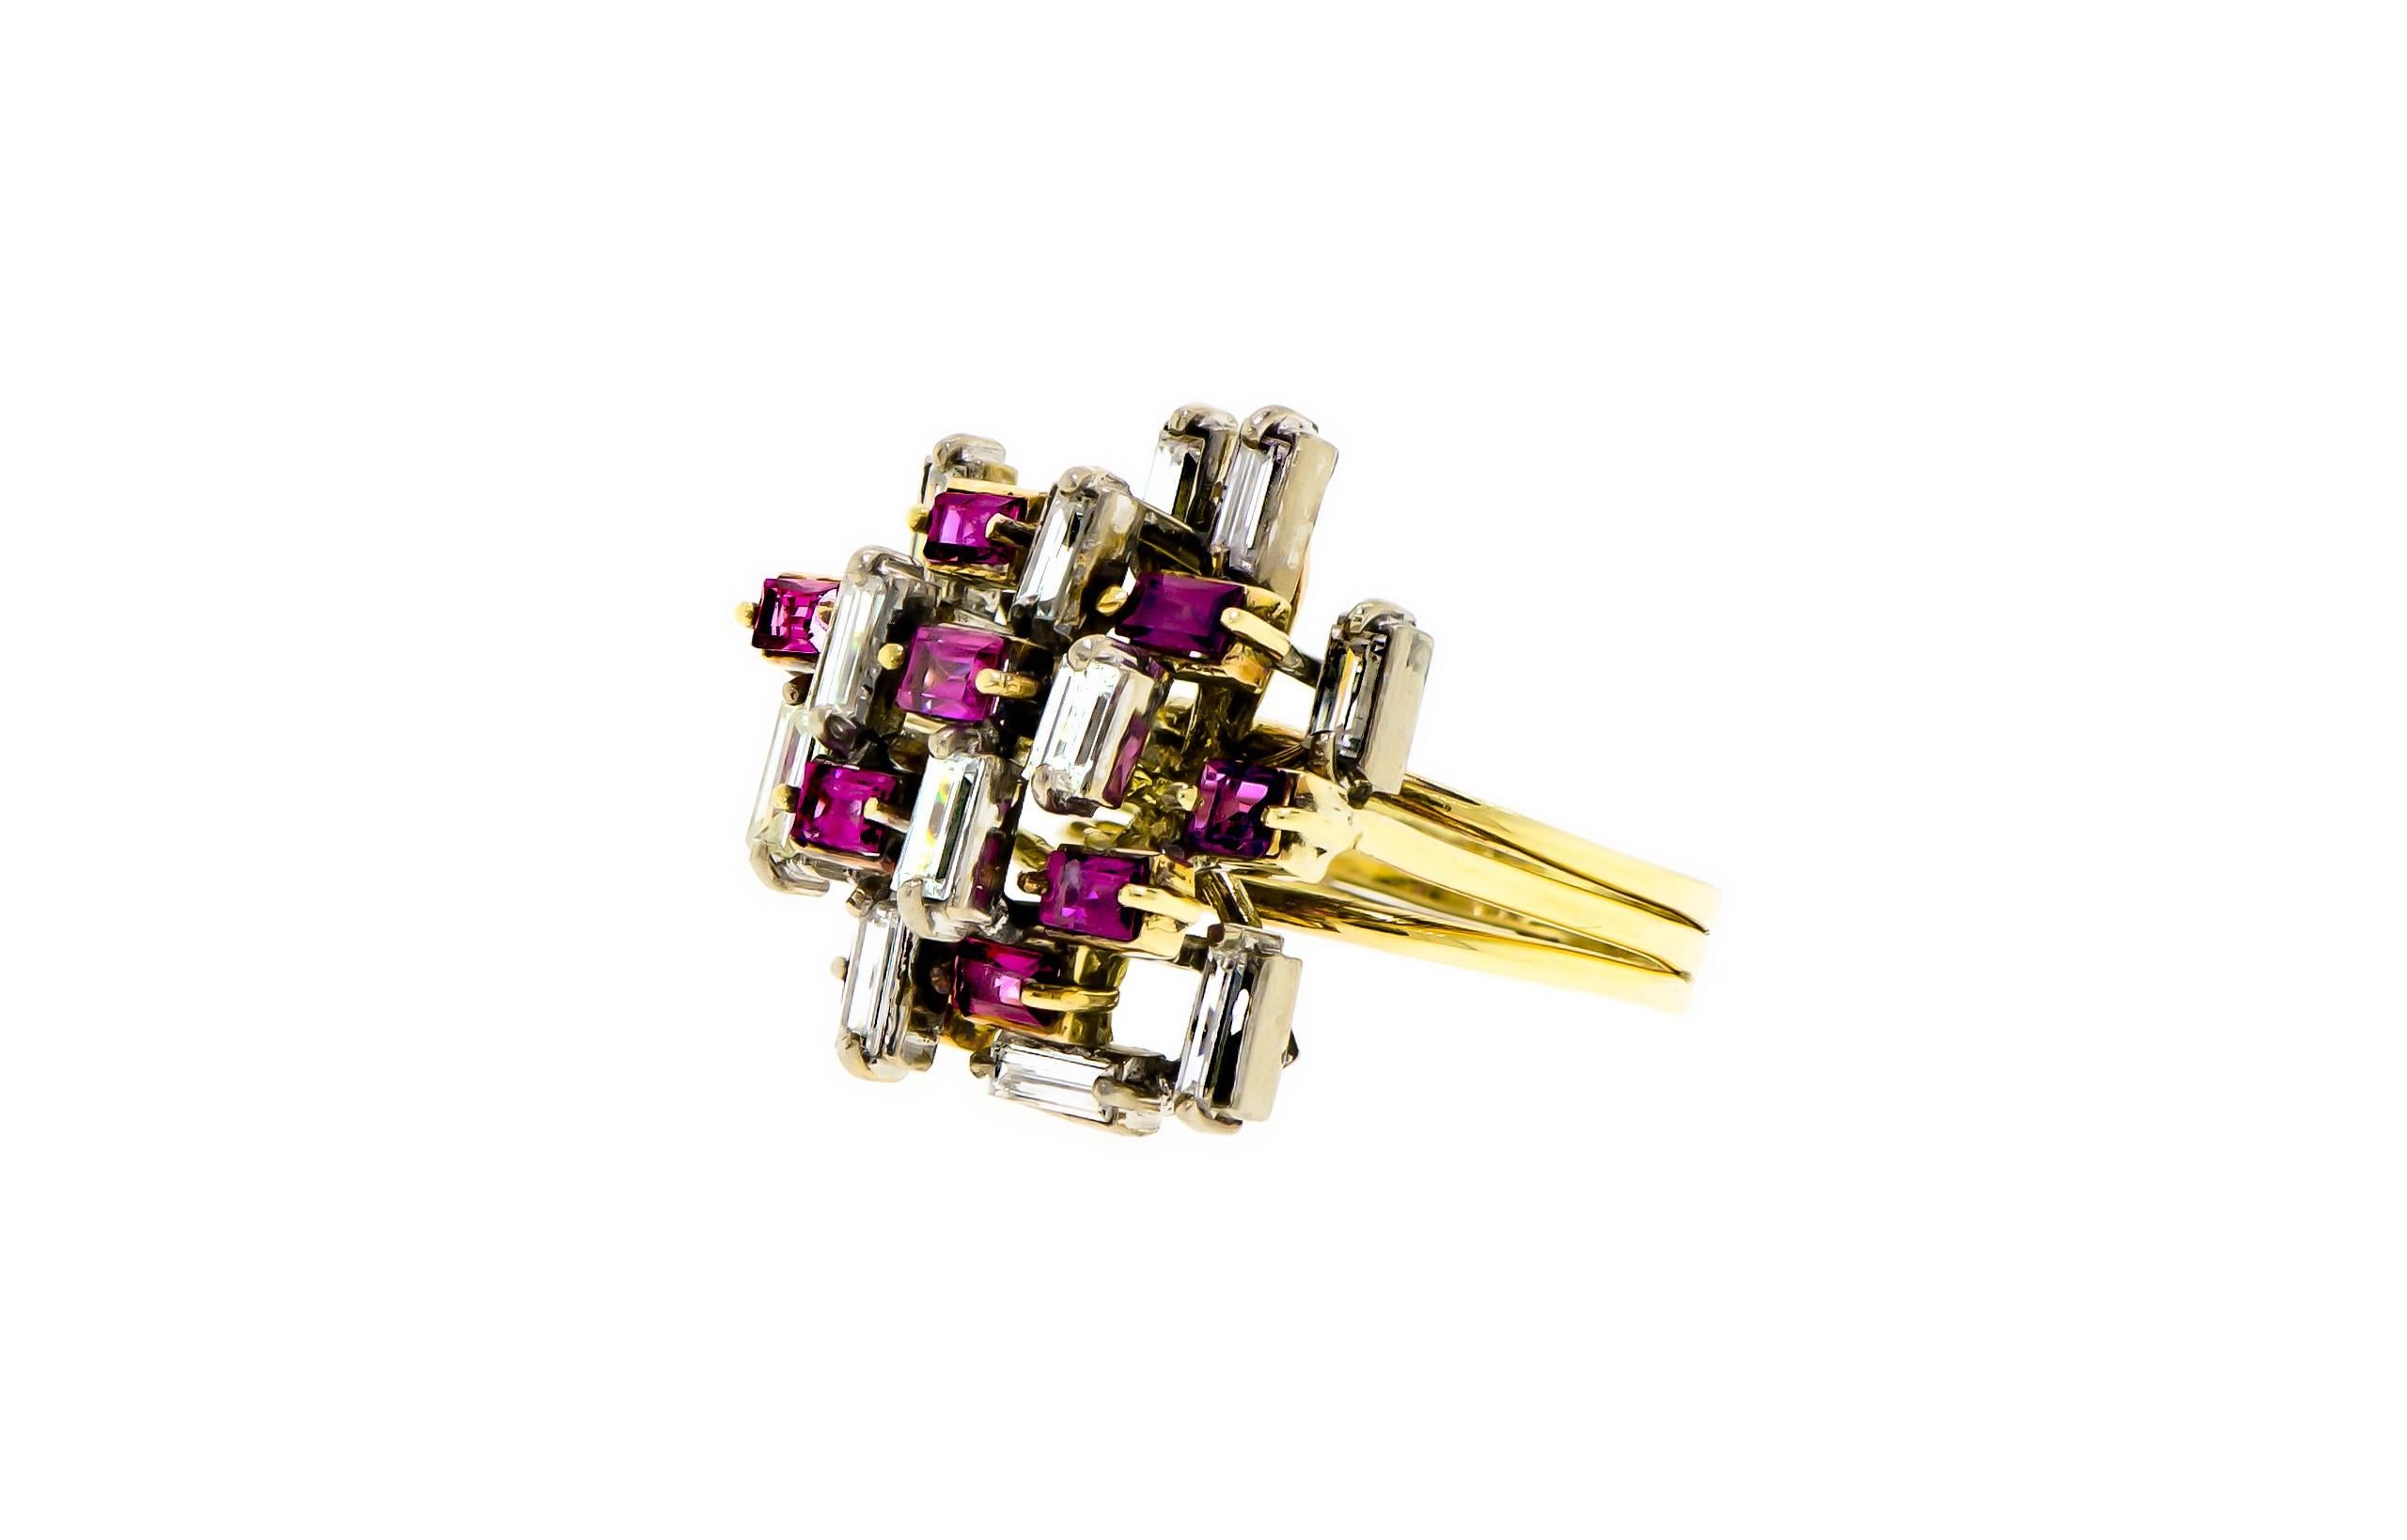 Vintage abstract 1970s ruby diamond and gold ring - abstract design of baguette cut diamonds and rubies arranged in a haphazard abstract design set in 14k white and yellow gold - measures approximately 1 inch; blocked on average - 14K and SM